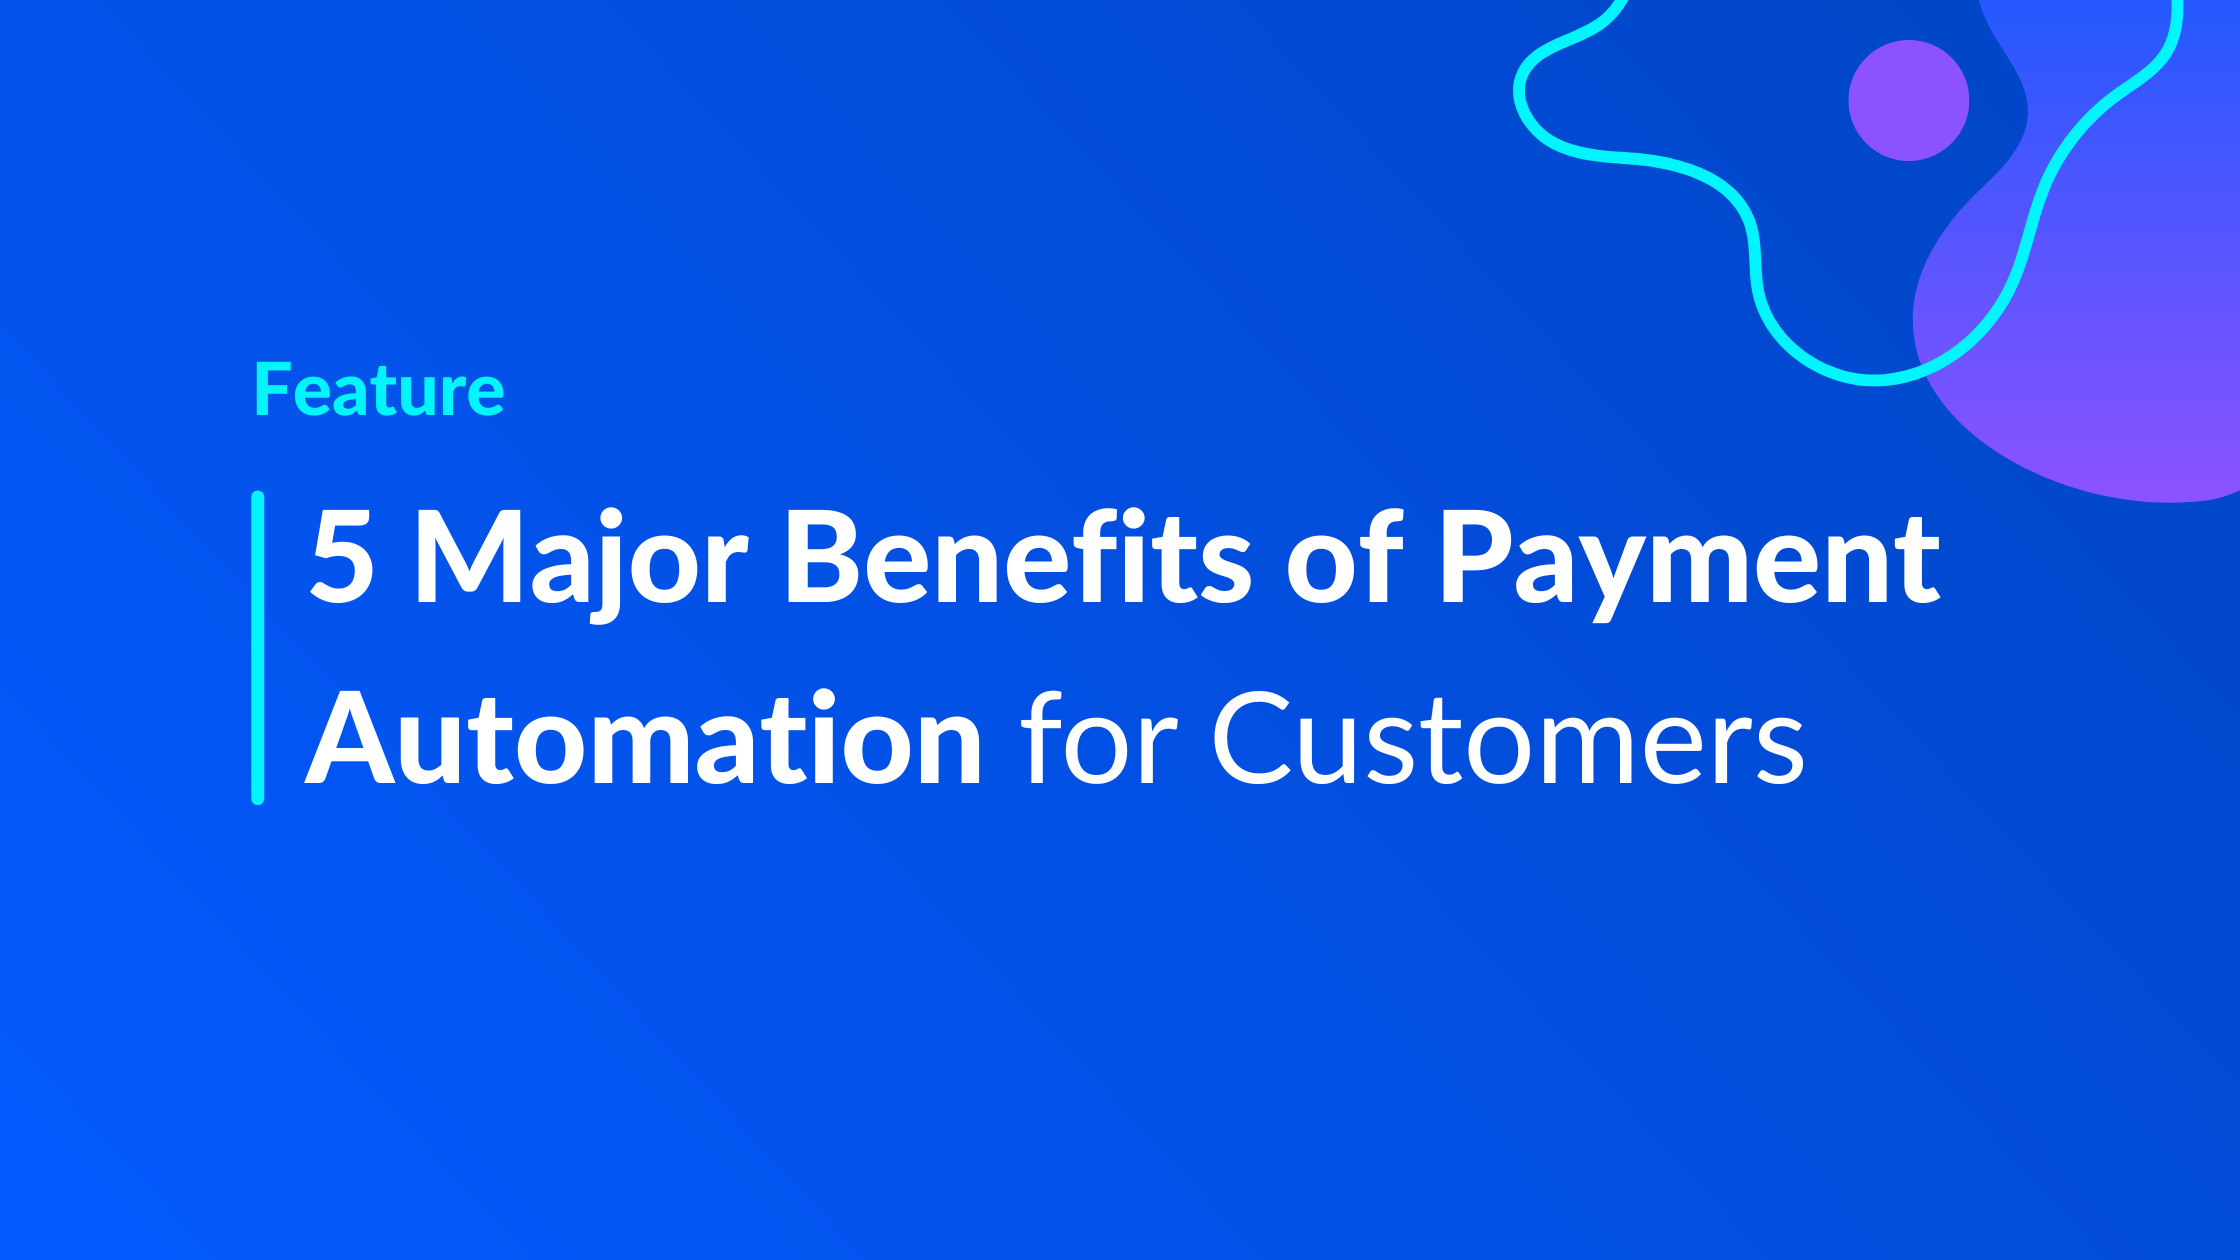 5 Major Benefits of Payment Automation for Customers